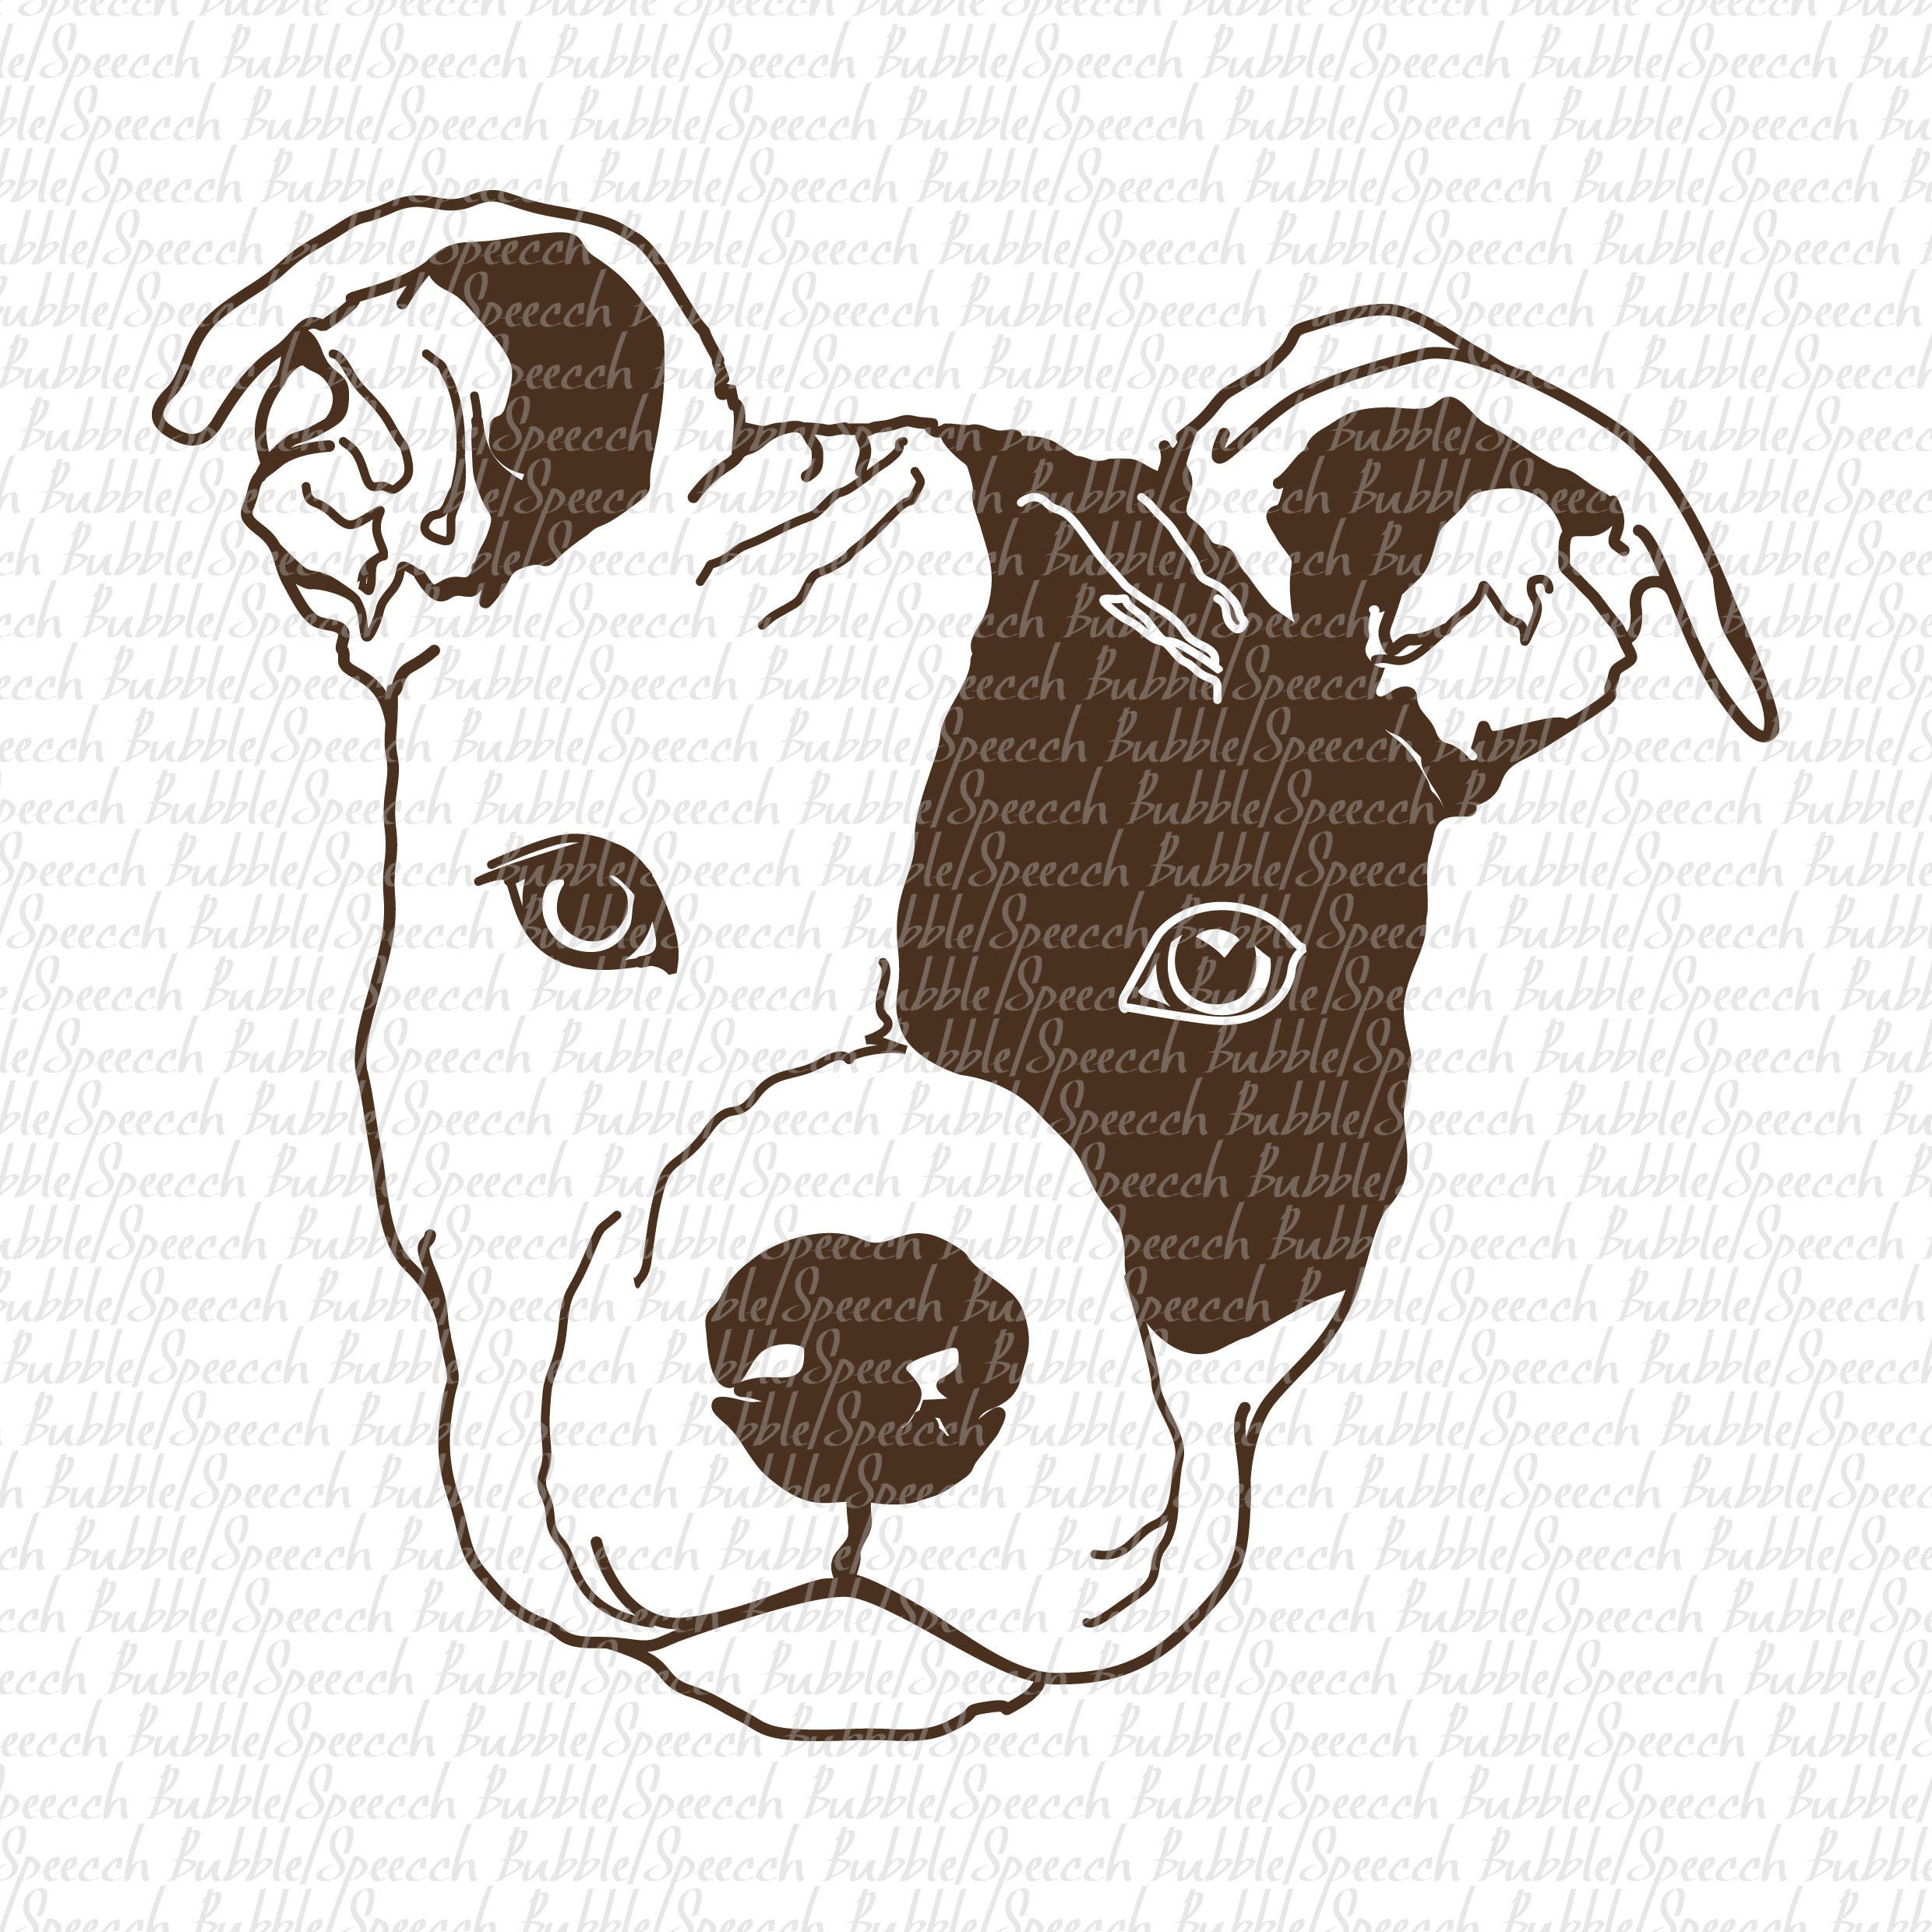 Pit Bull Svg Clipart Dog vector art by SpeecchBubble | Etsy